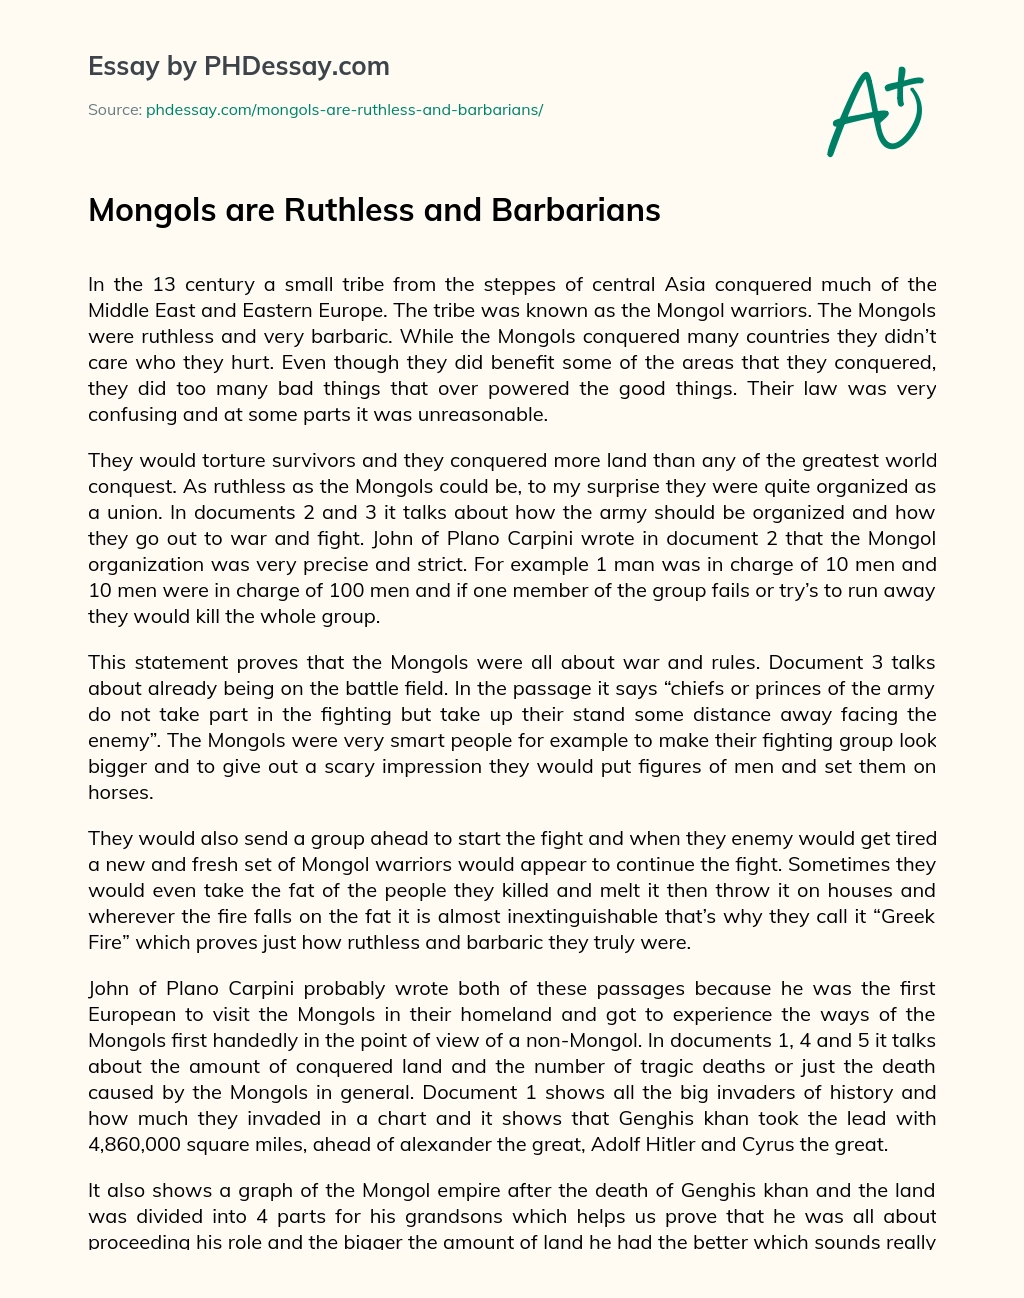 Mongols are Ruthless and Barbarians essay